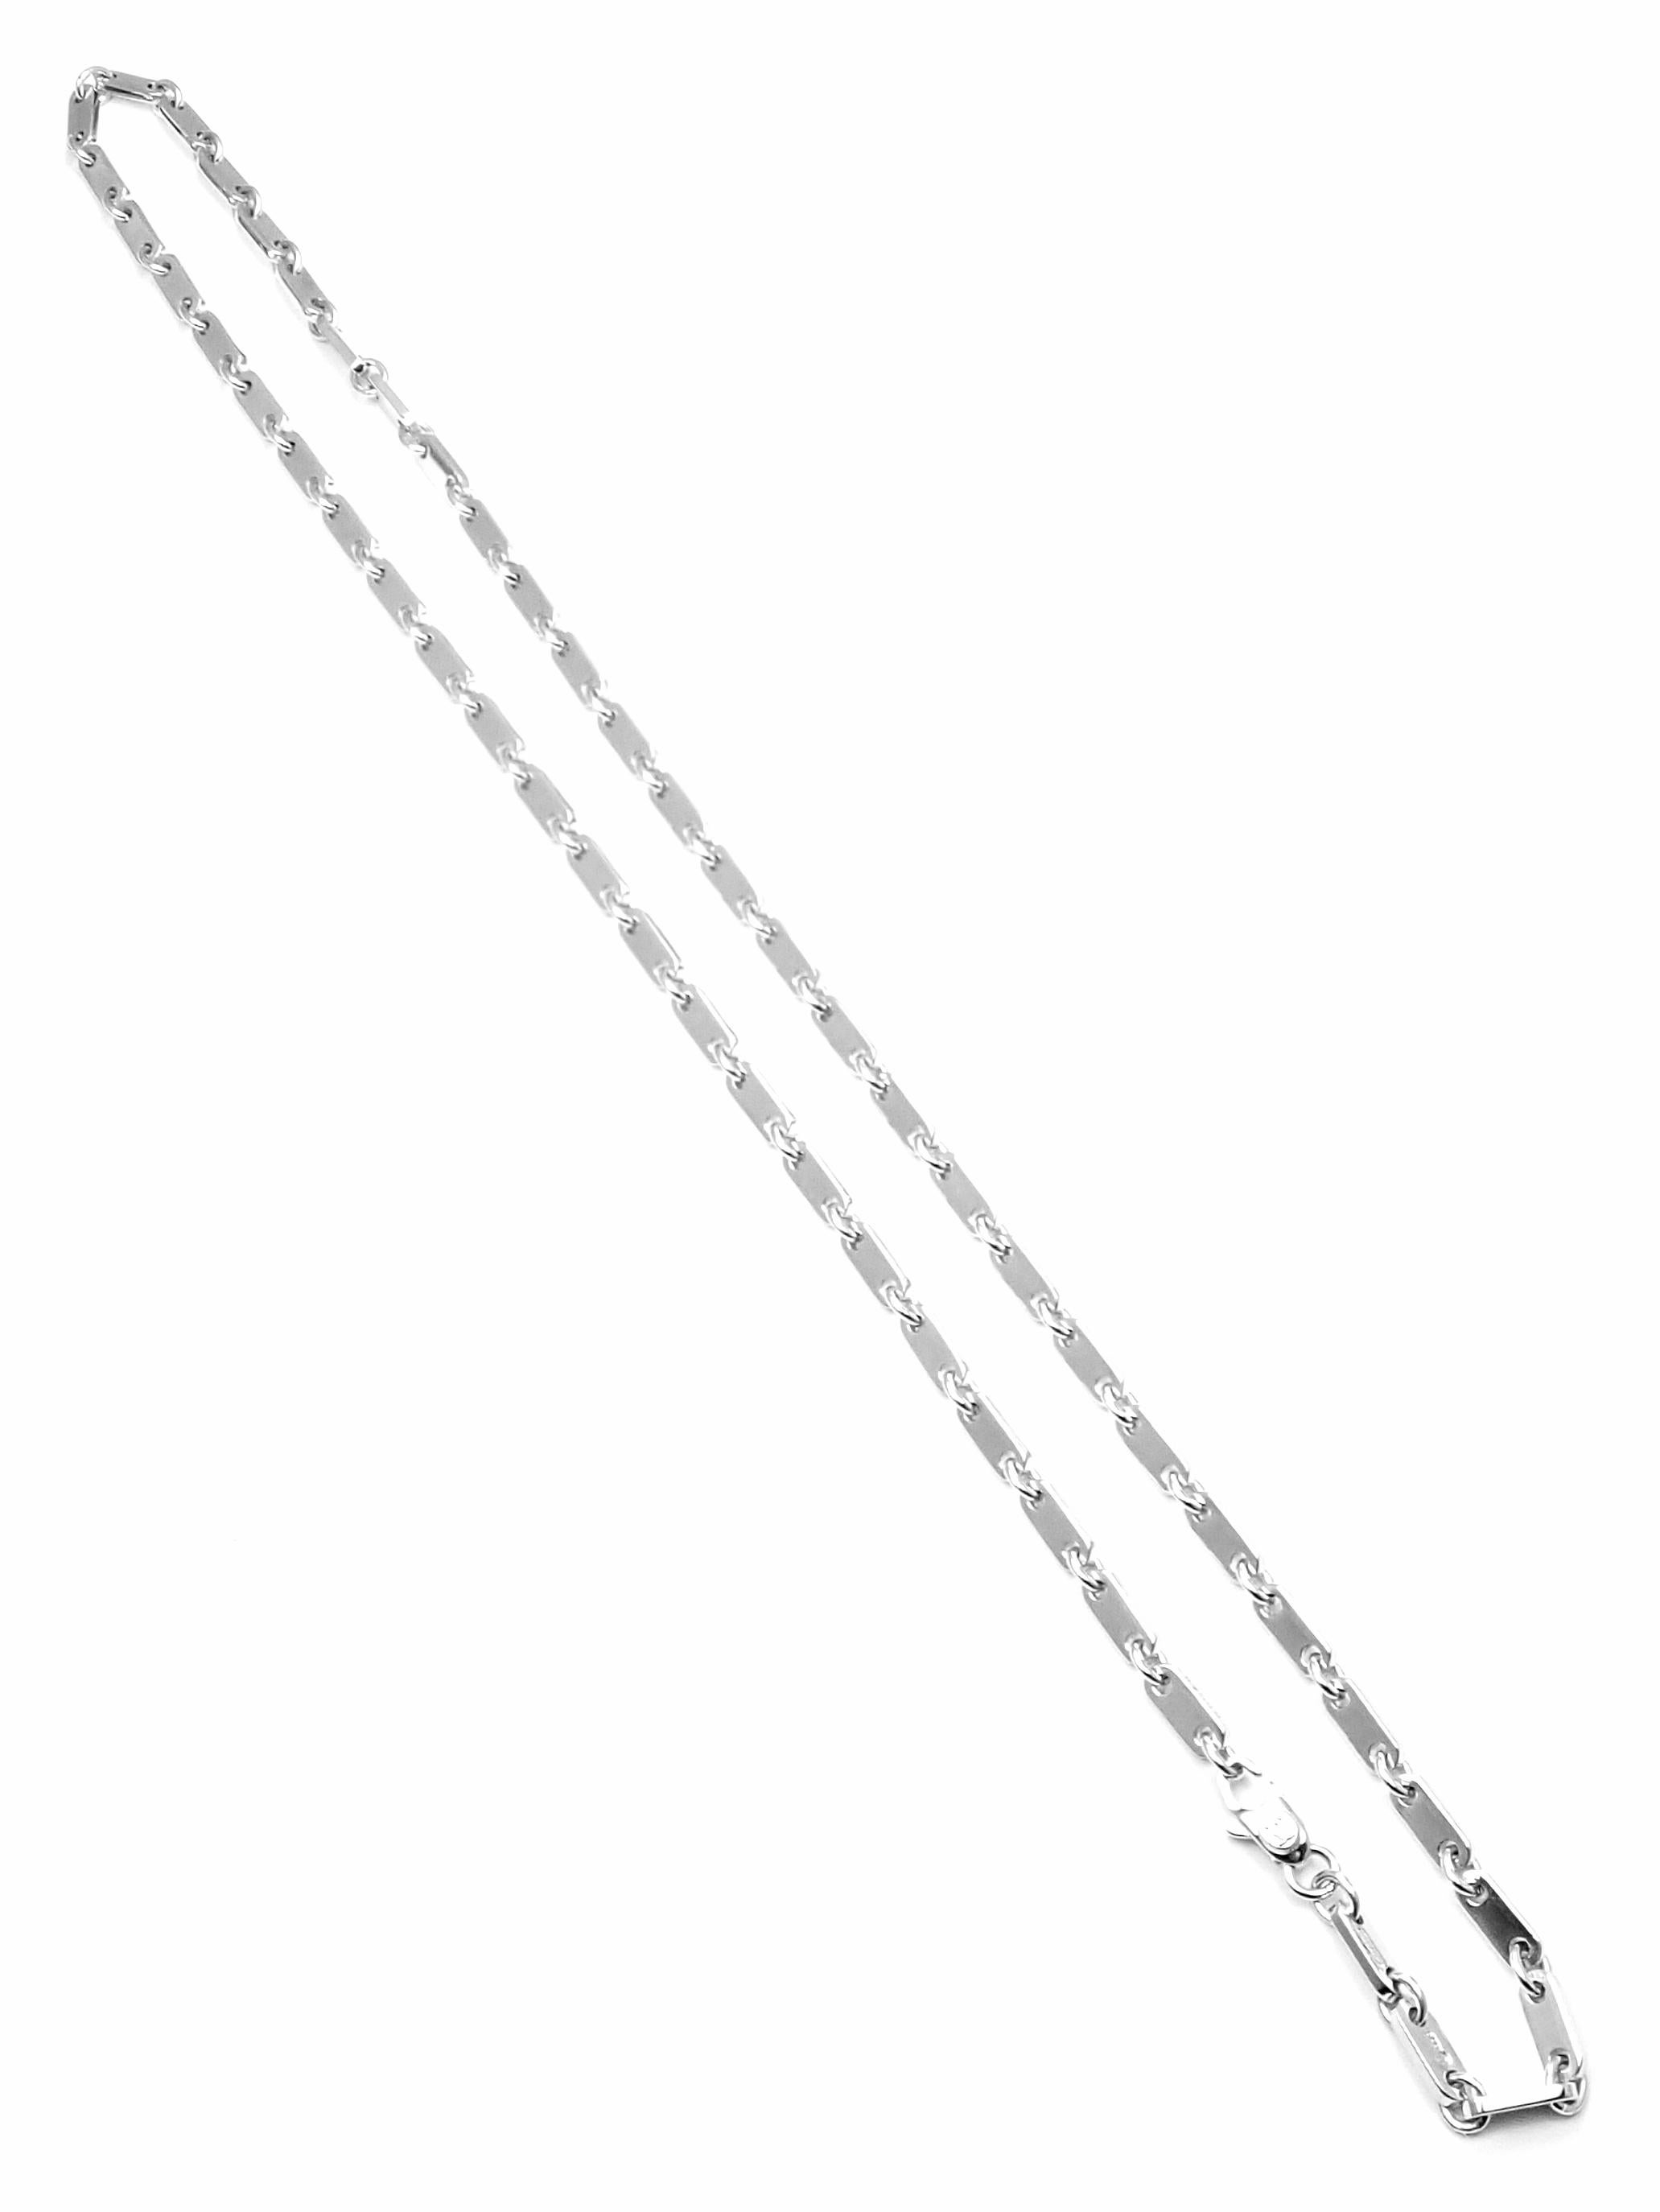 Cartier Link White Gold Chain Necklace, 1998 4